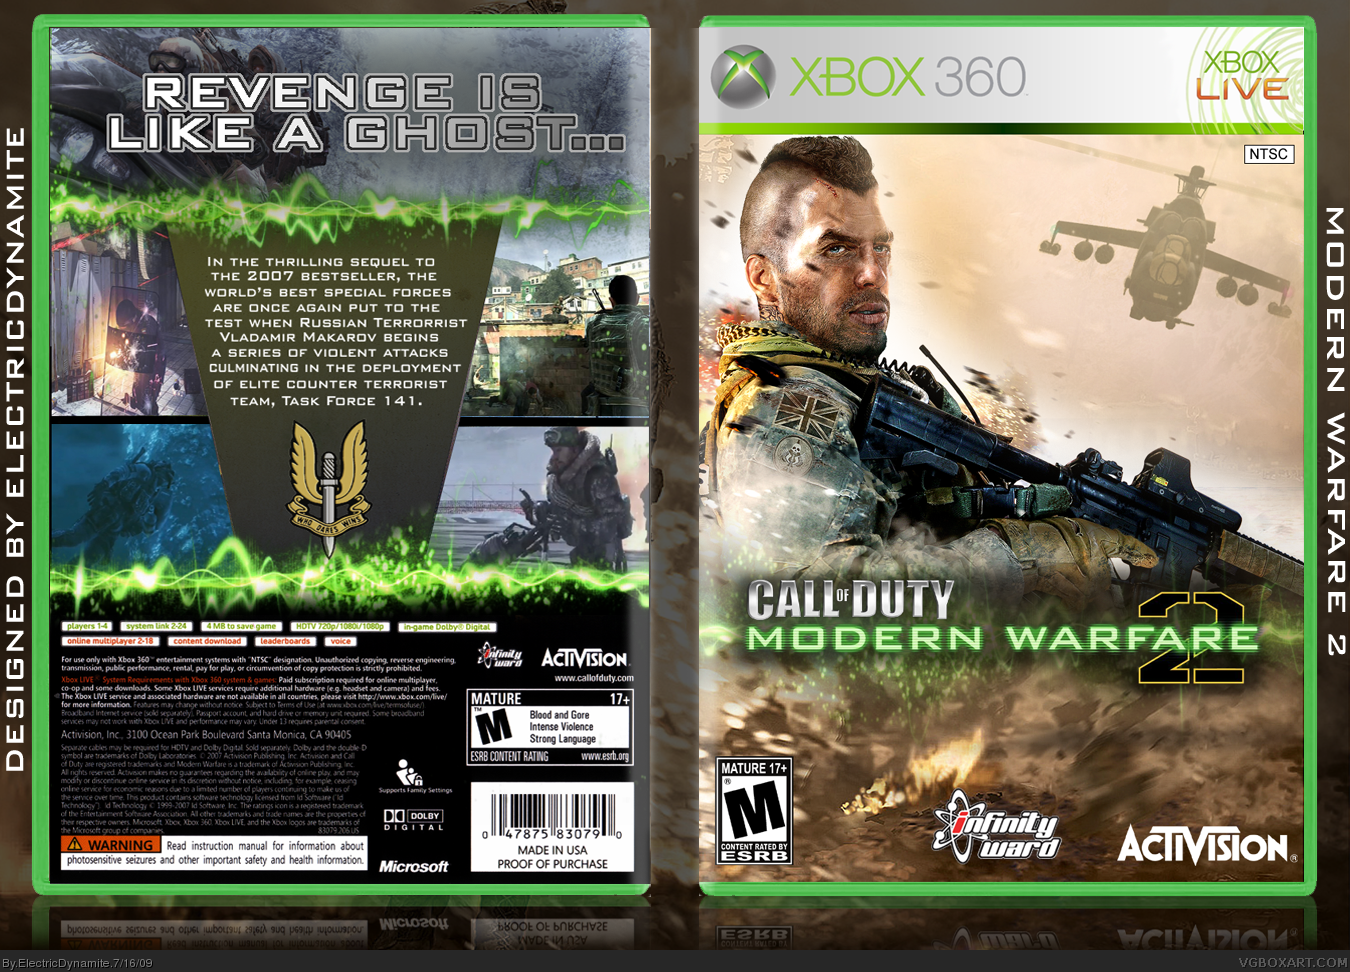 Viewing full size Call of Duty: Modern Warfare 2 box cover 